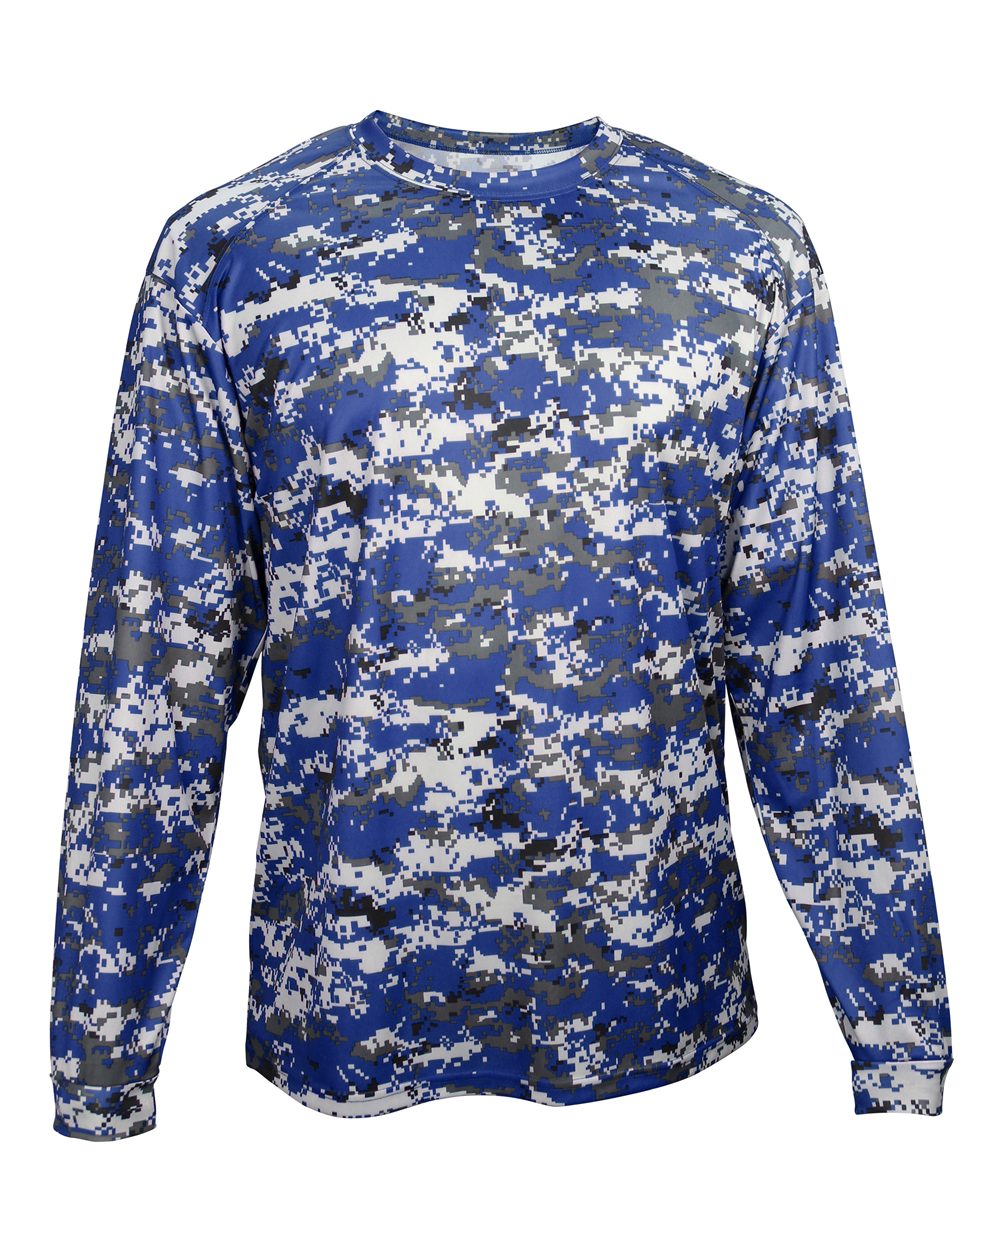 Badger Sport Digi-Camo Short & Long Sleeve Side Panel Athletic Performance Wicking Shirt/Jersey 18 Colors, Youth/Adult 